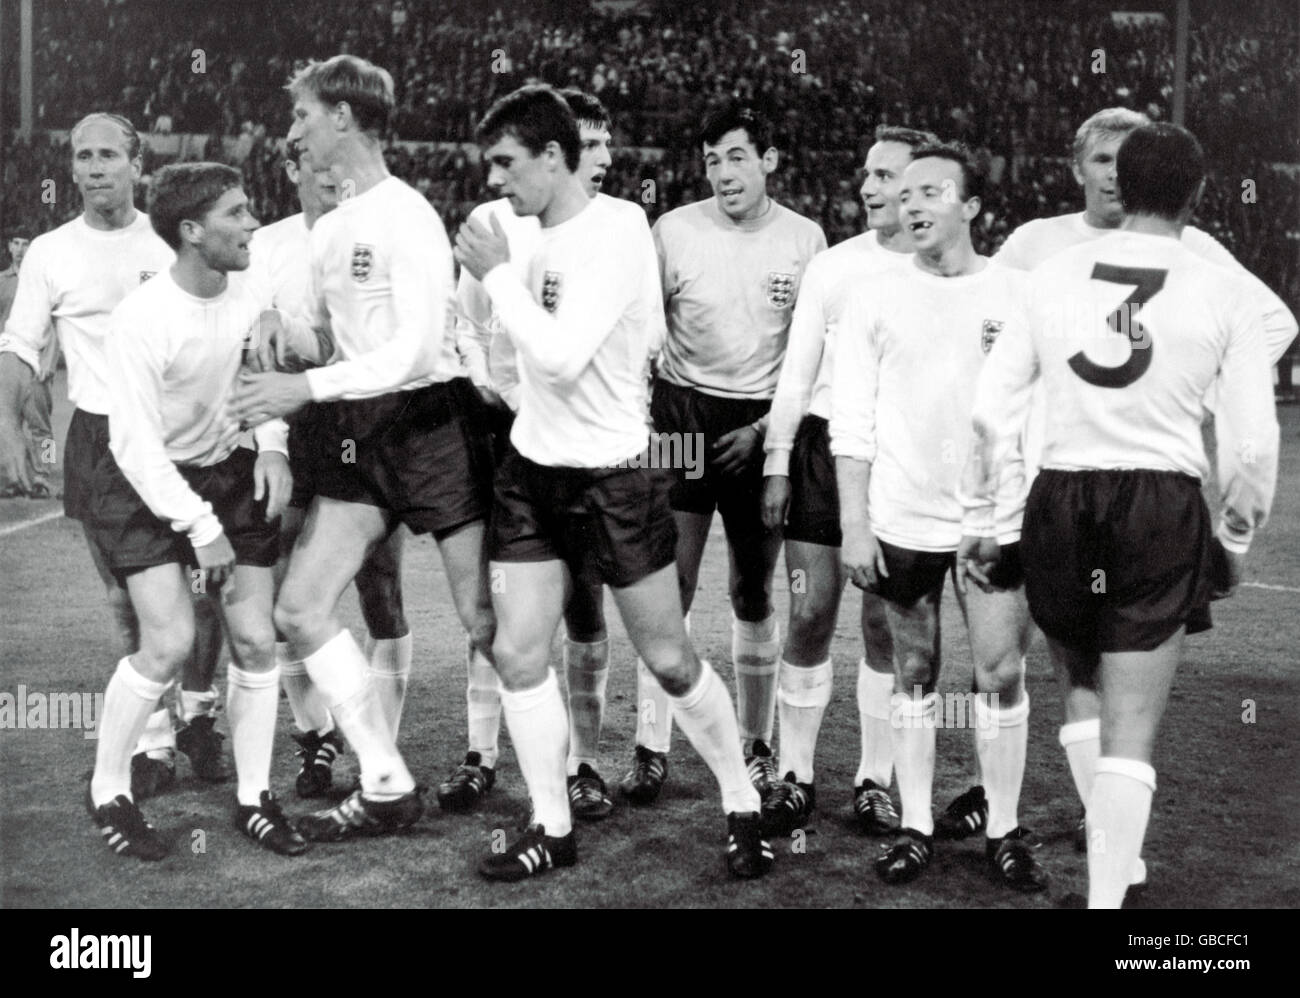 England players celebrate reaching the World Cup Final after their 2-1 win: (l-r) Bobby Charlton, Alan Ball, Roger Hunt, Jack Charlton, Geoff Hurst, Martin Peters (behind), Gordon Banks, George Cohen, Nobby Stiles, Bobby Moore, Ray Wilson Stock Photo